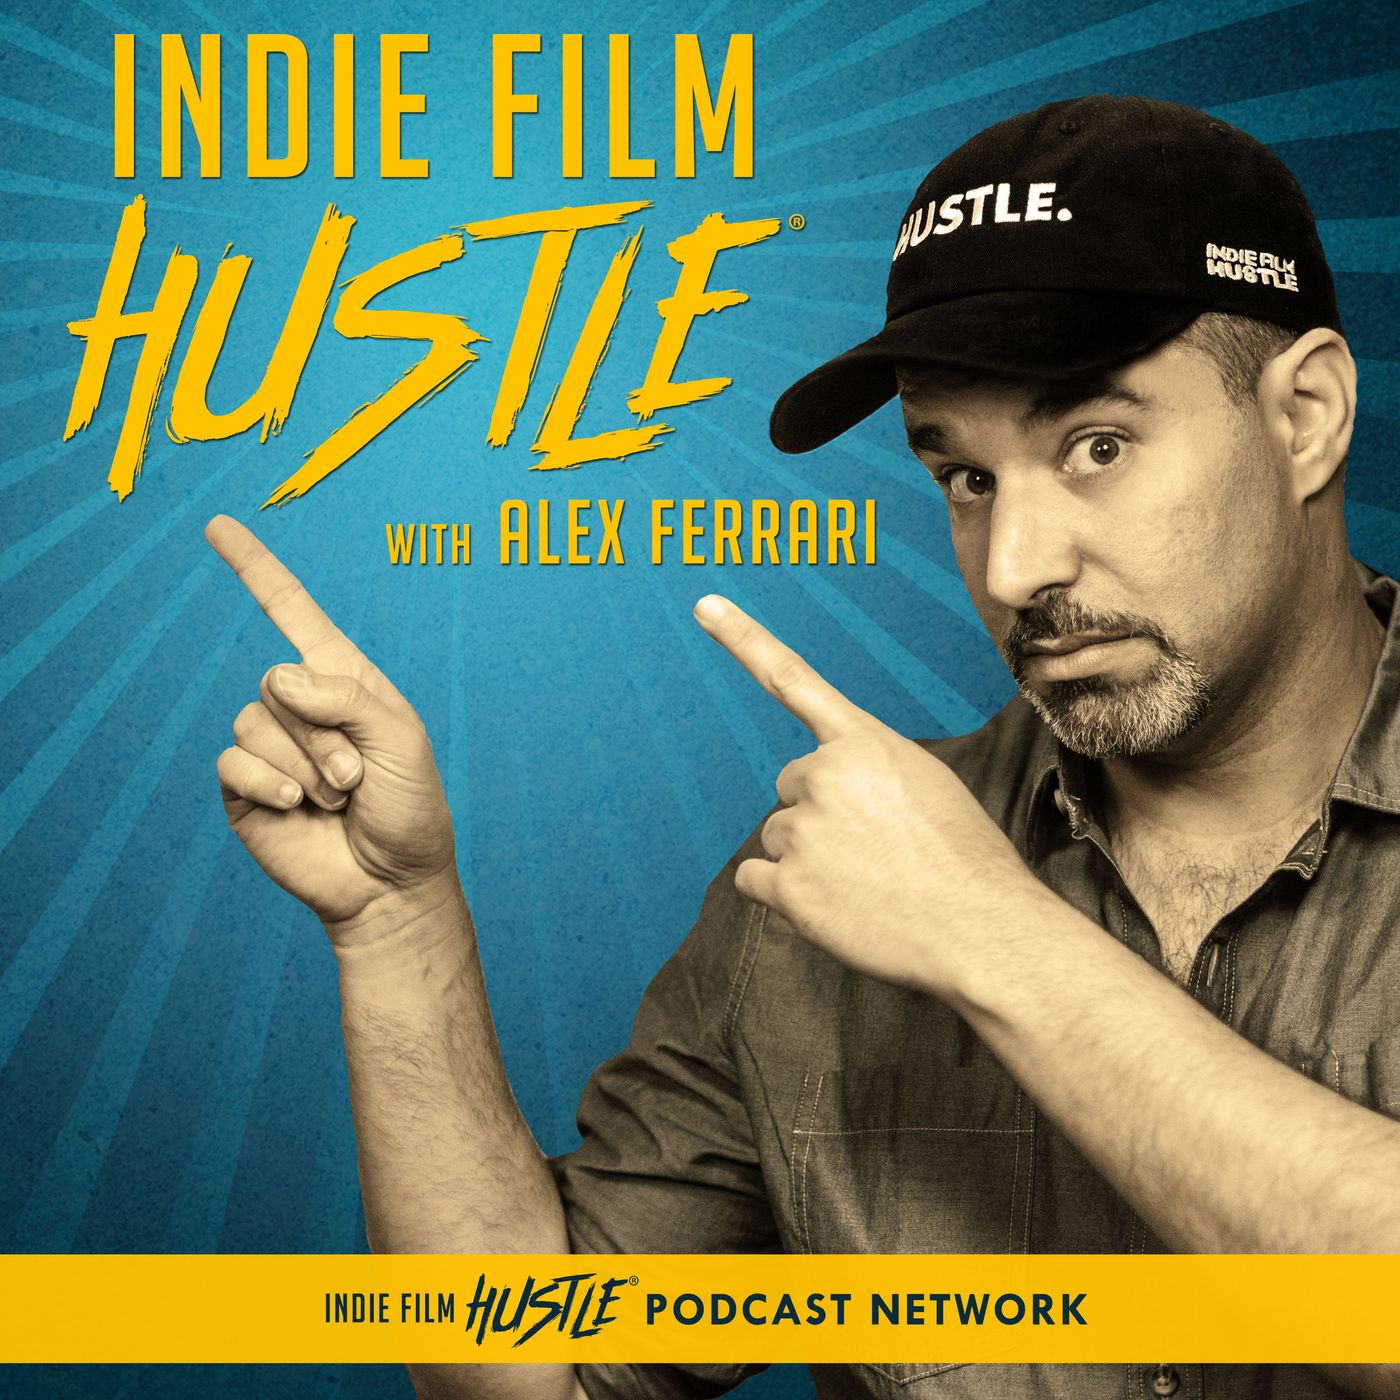 IFH 130: Elijah Wood and the SpectreVision Team - Creating a Brand & Making Killer Films